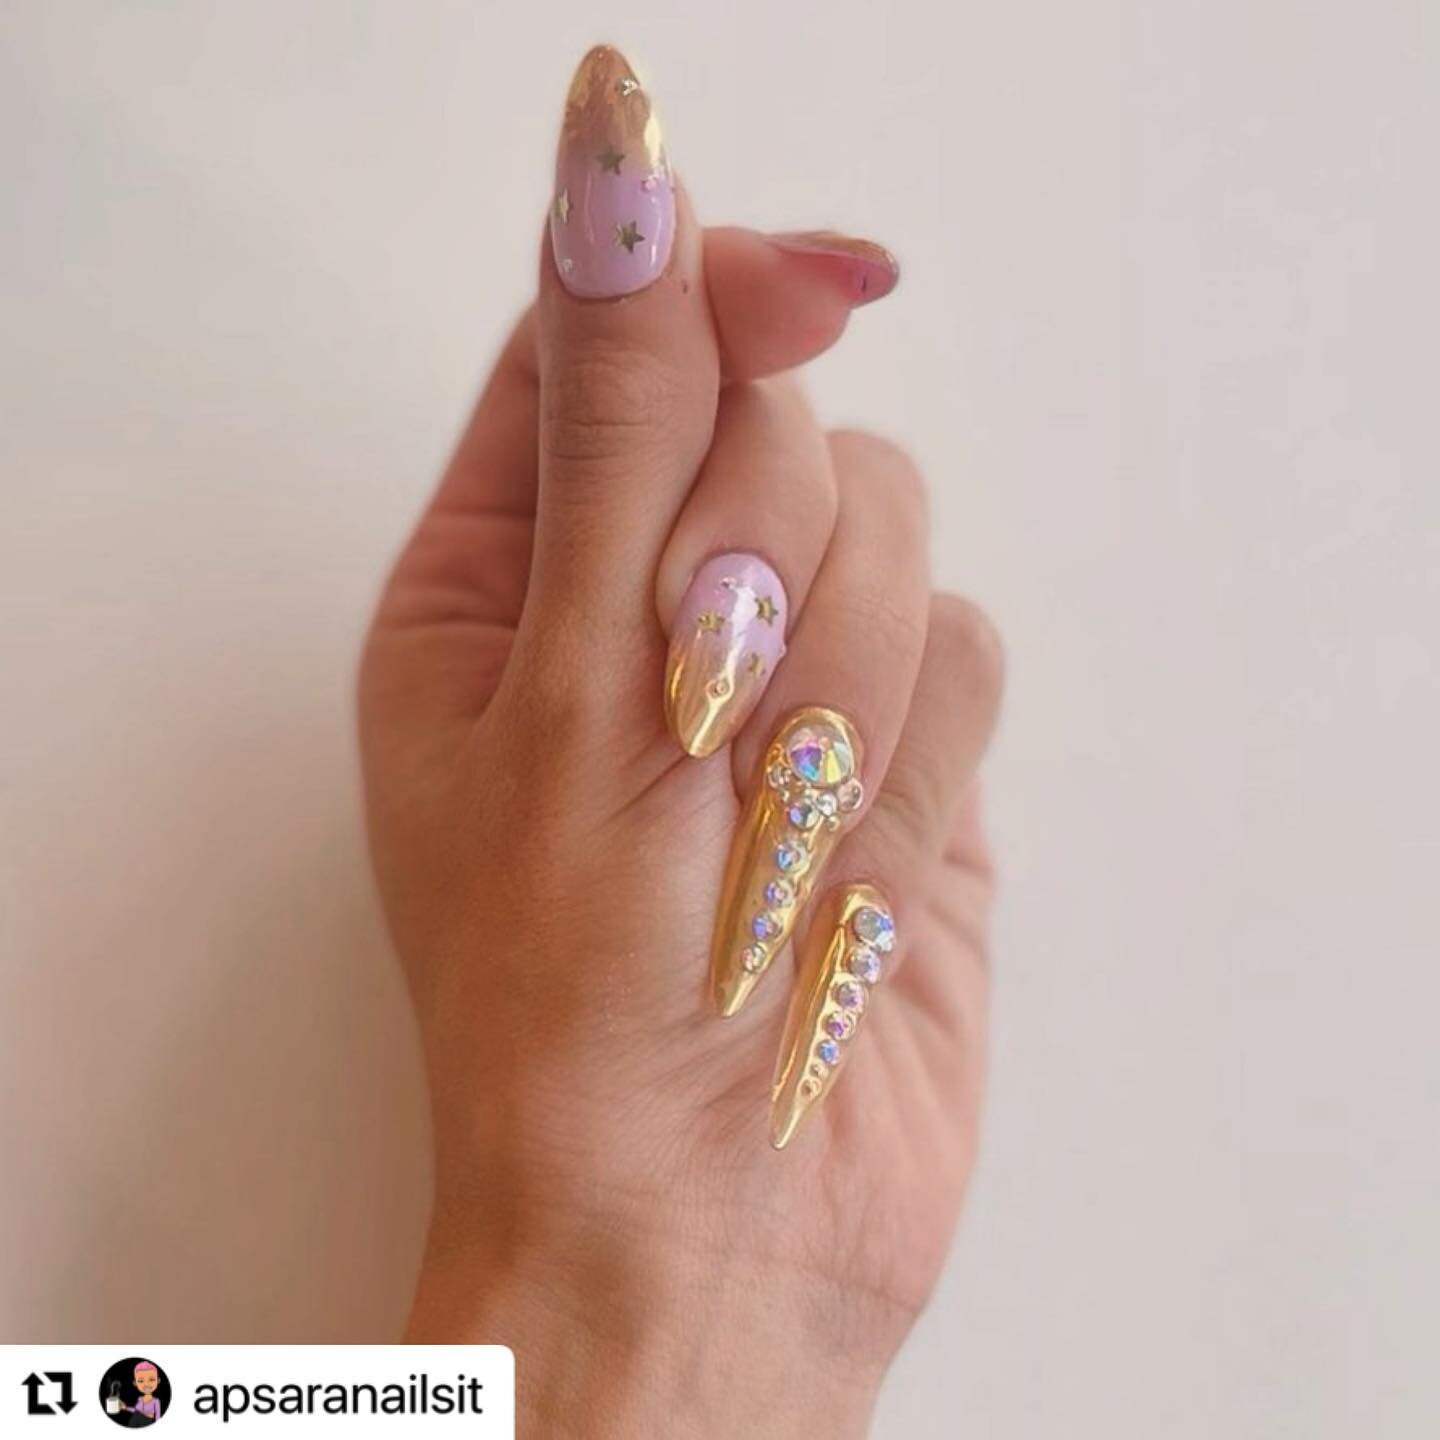 #Repost @apsaranailsit with @use.repost @refinenailsandspa 
・・・
Inspired by the Ming and Qing dynasty when hu zhi(finger coverings) were all the rage among upper class and the imperial court to show high status.